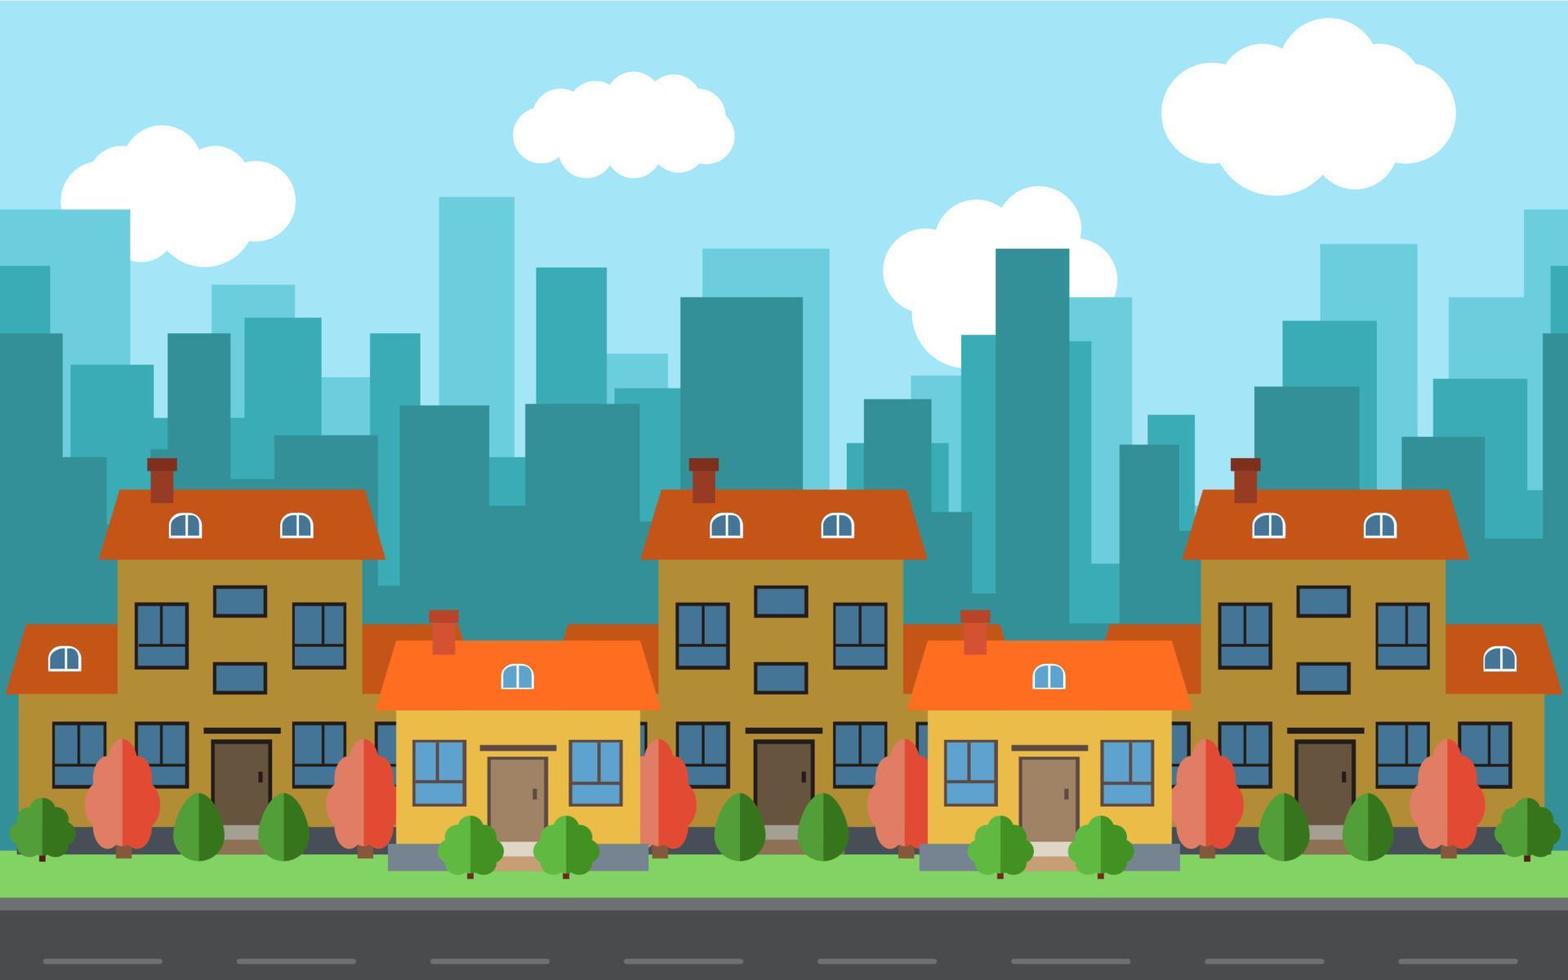 Vector city with five cartoon houses and buildings. City space with road on flat style background concept. Summer urban landscape. Street view with cityscape on a background